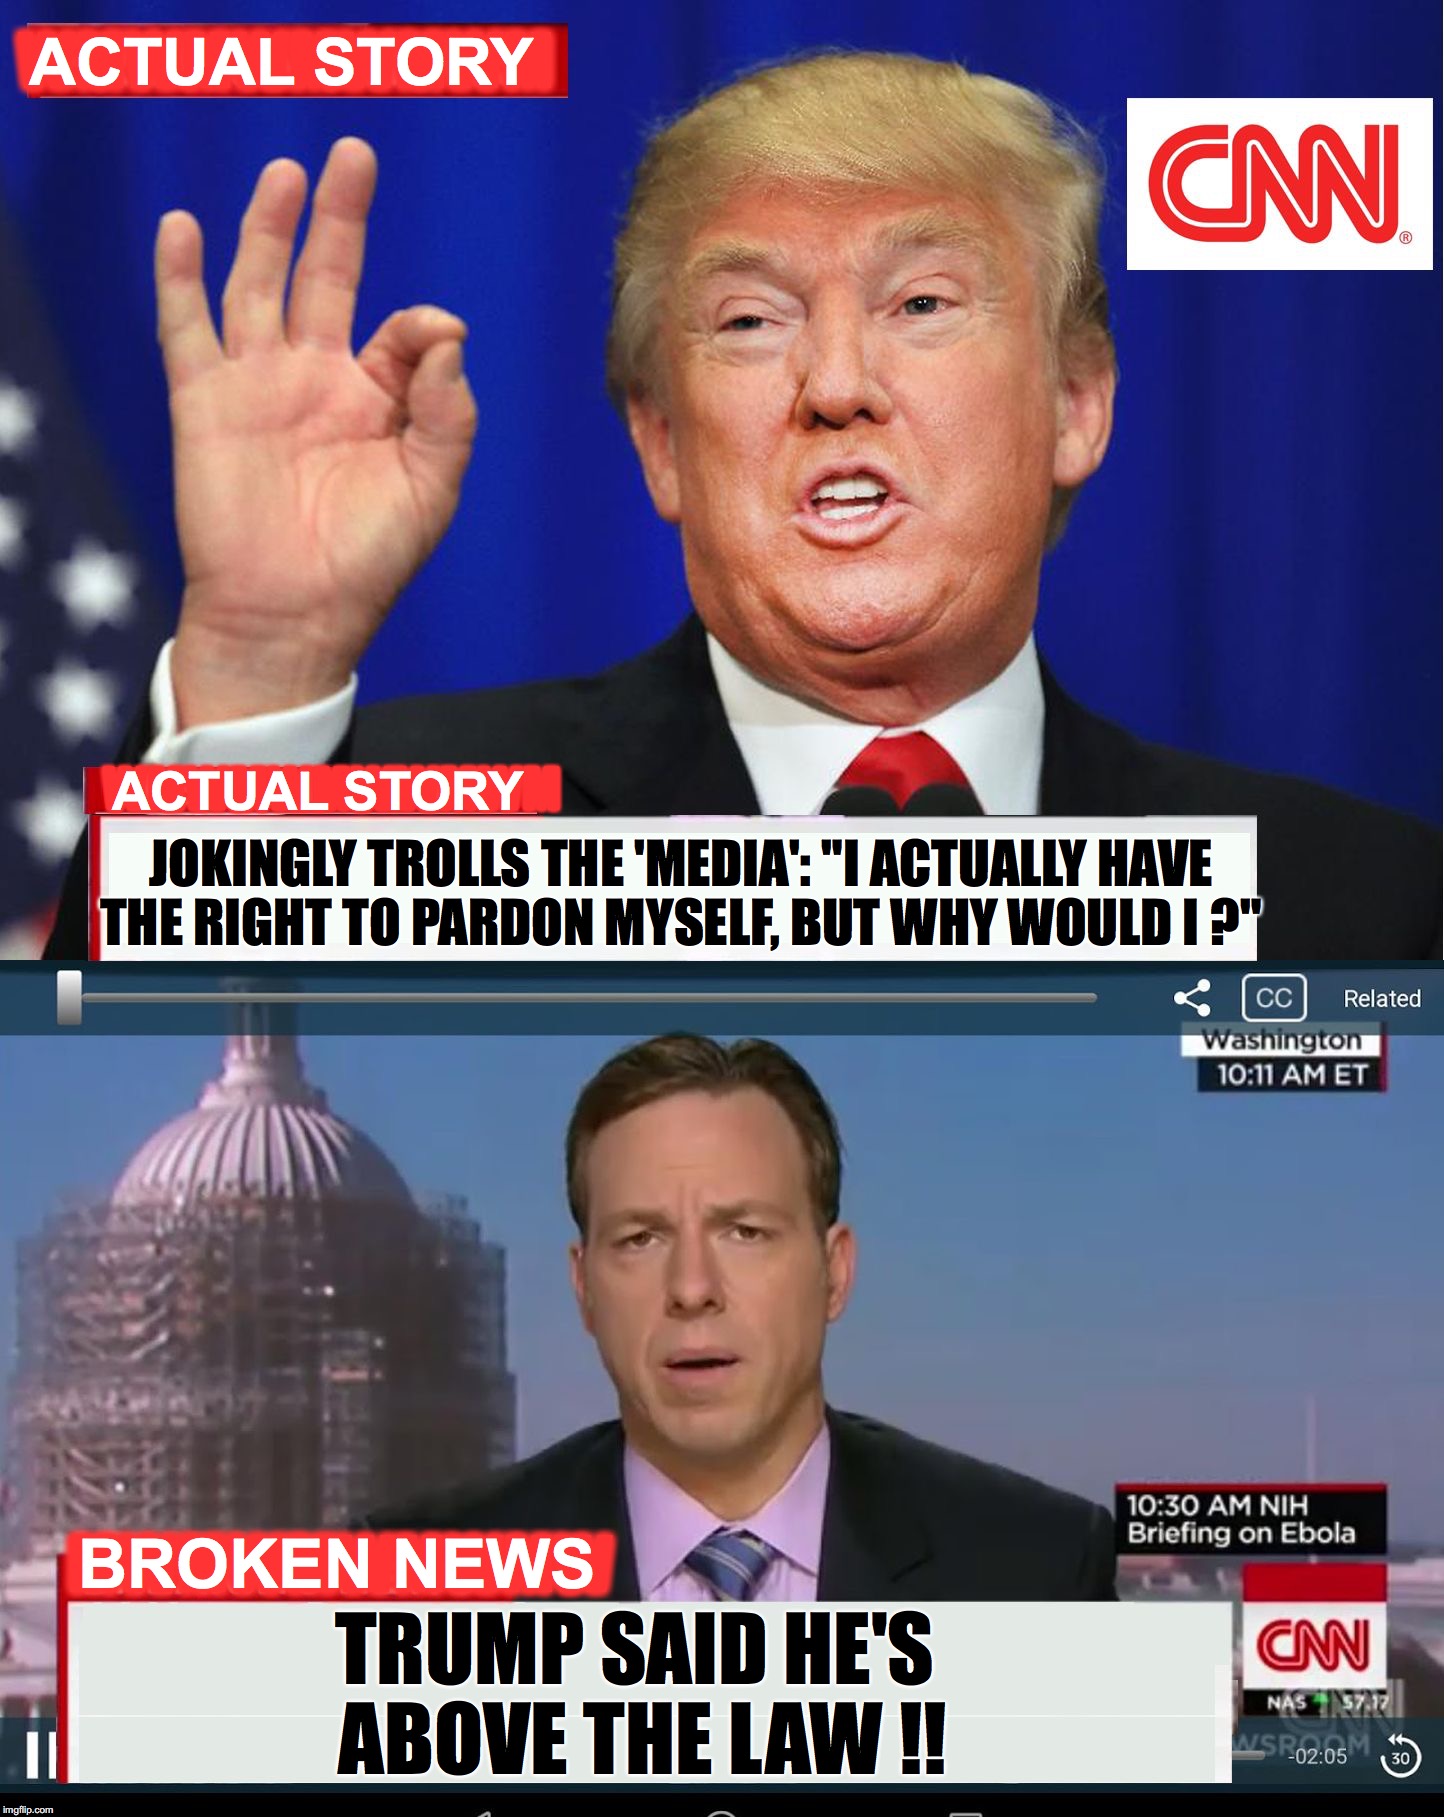 CNN Spins Trump News  | ACTUAL STORY; WMWMWMWMWM; WMWMWMWWMWM; ACTUAL STORY; JOKINGLY TROLLS THE 'MEDIA': "I ACTUALLY HAVE THE RIGHT TO PARDON MYSELF, BUT WHY WOULD I ?"; MWMWMWMWMW; BROKEN NEWS; TRUMP SAID HE'S ABOVE THE LAW !! | image tagged in cnn spins trump news | made w/ Imgflip meme maker